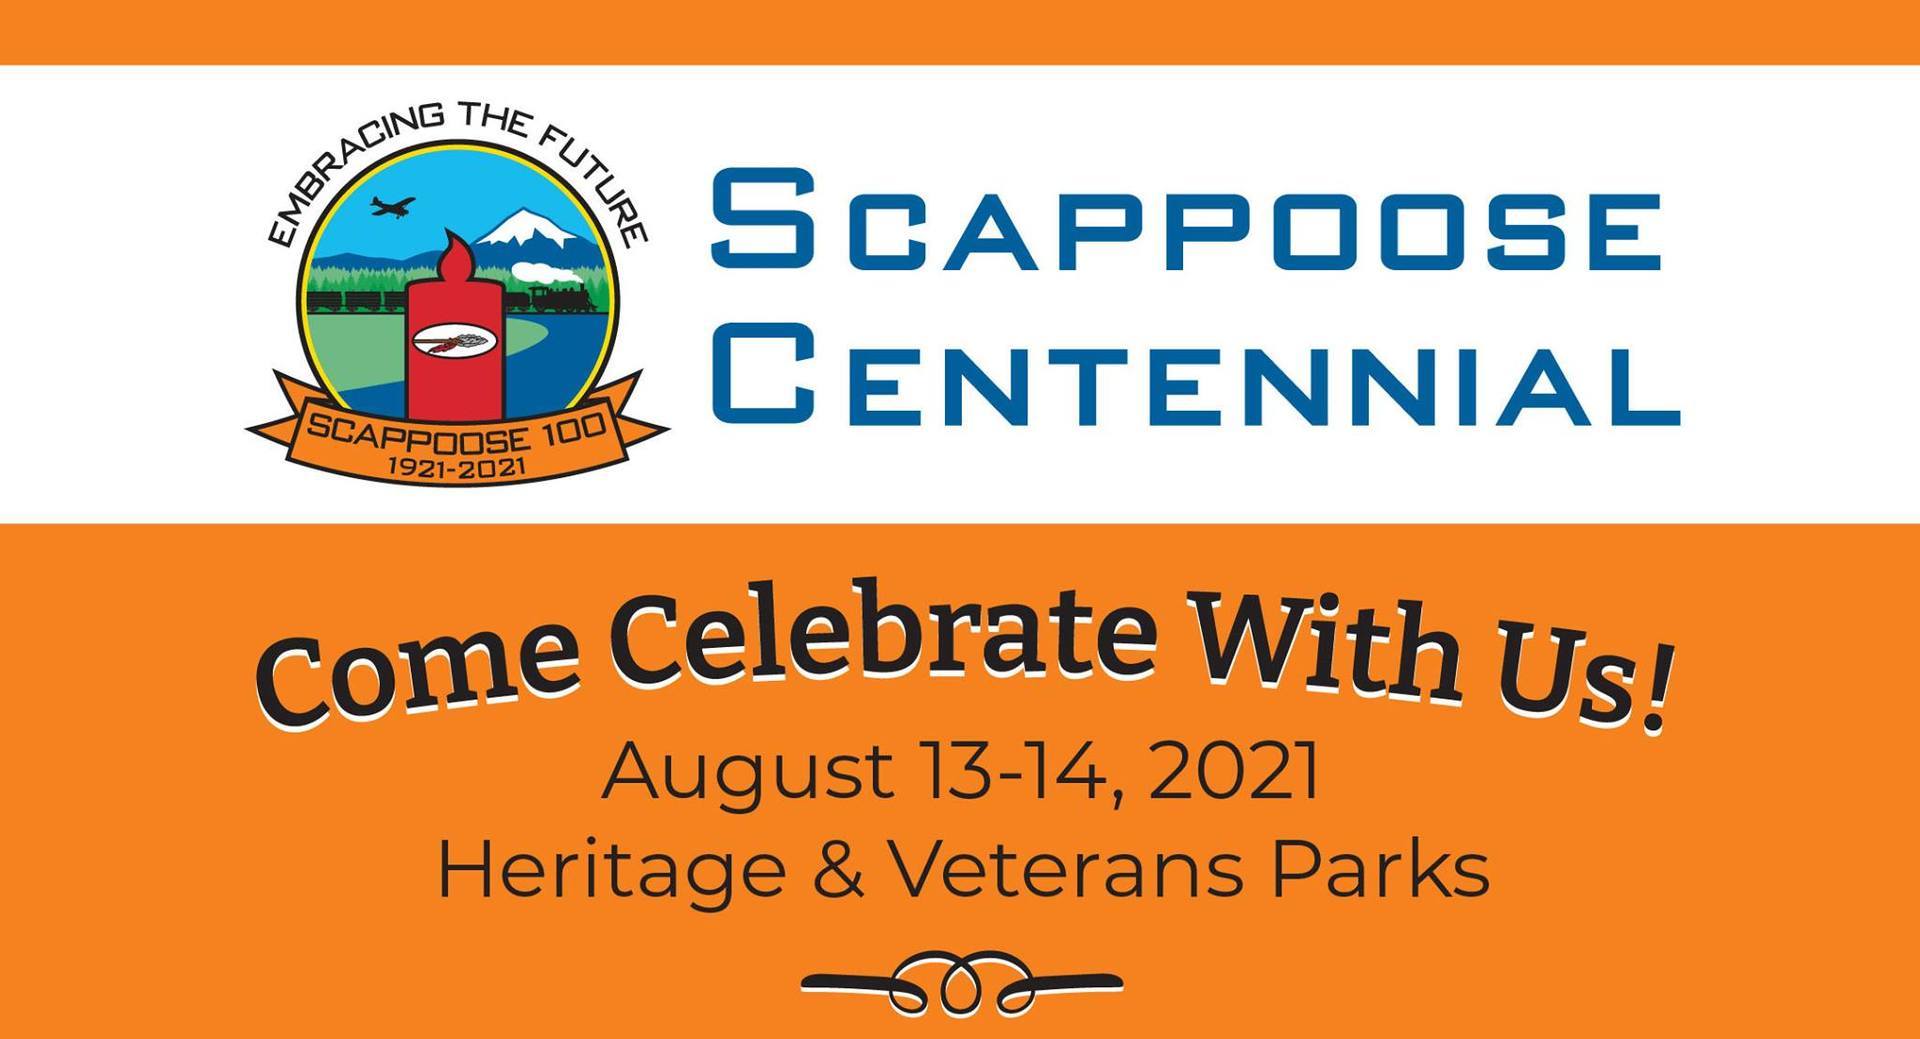 Scappoose 100-Year Centennial Celebration, Scappoose, Oregon, United States